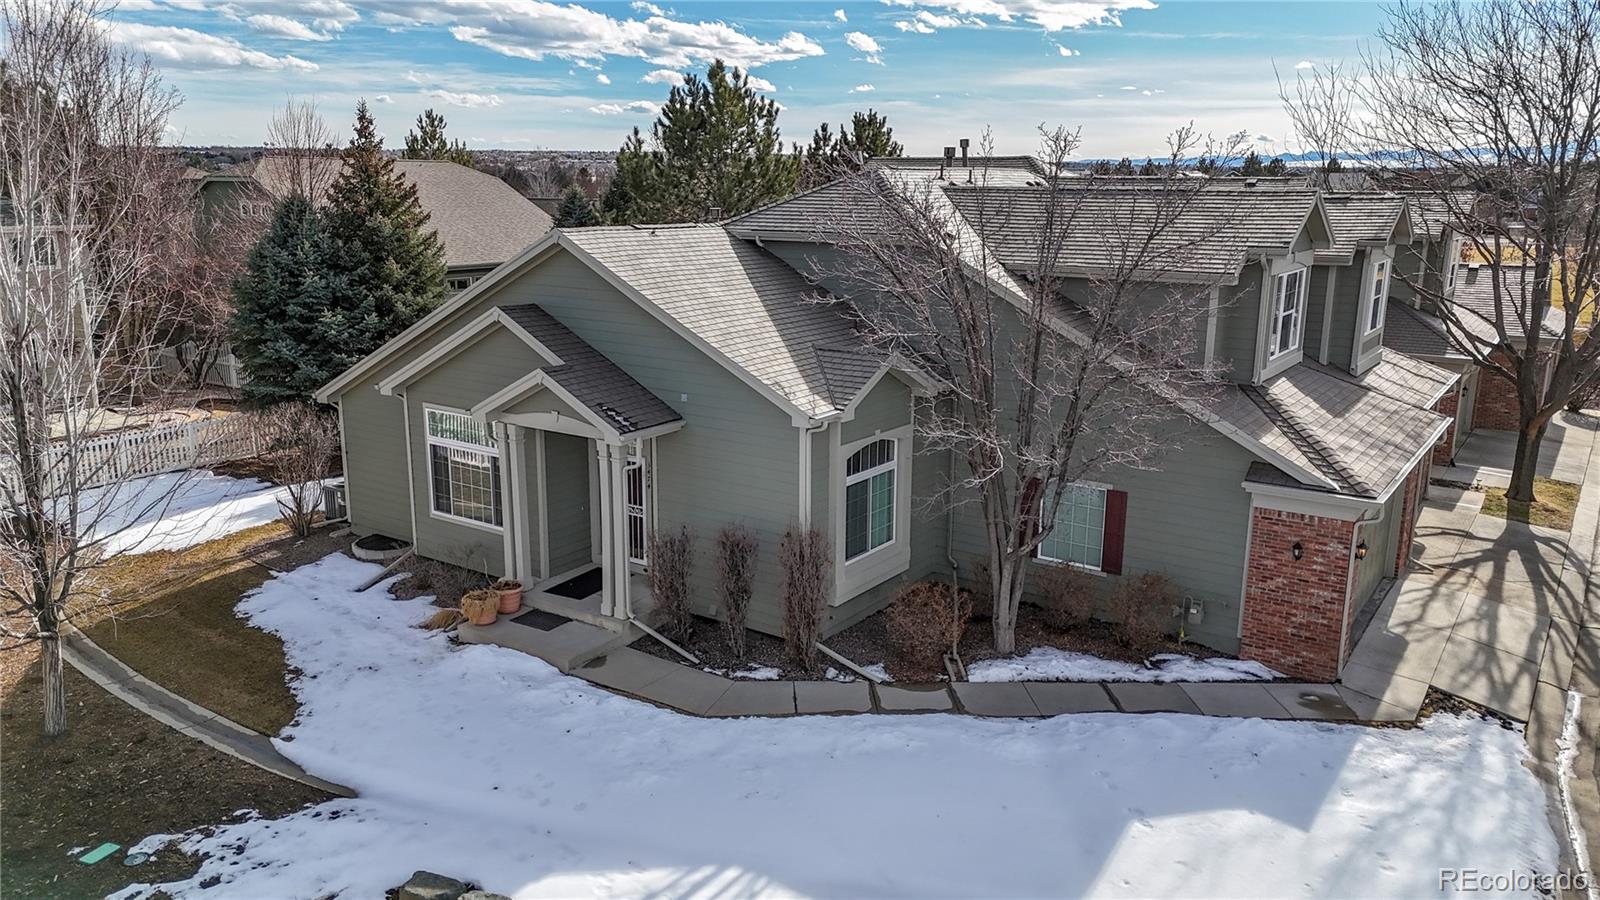 Report Image for 3474 W 125th Point,Broomfield, Colorado